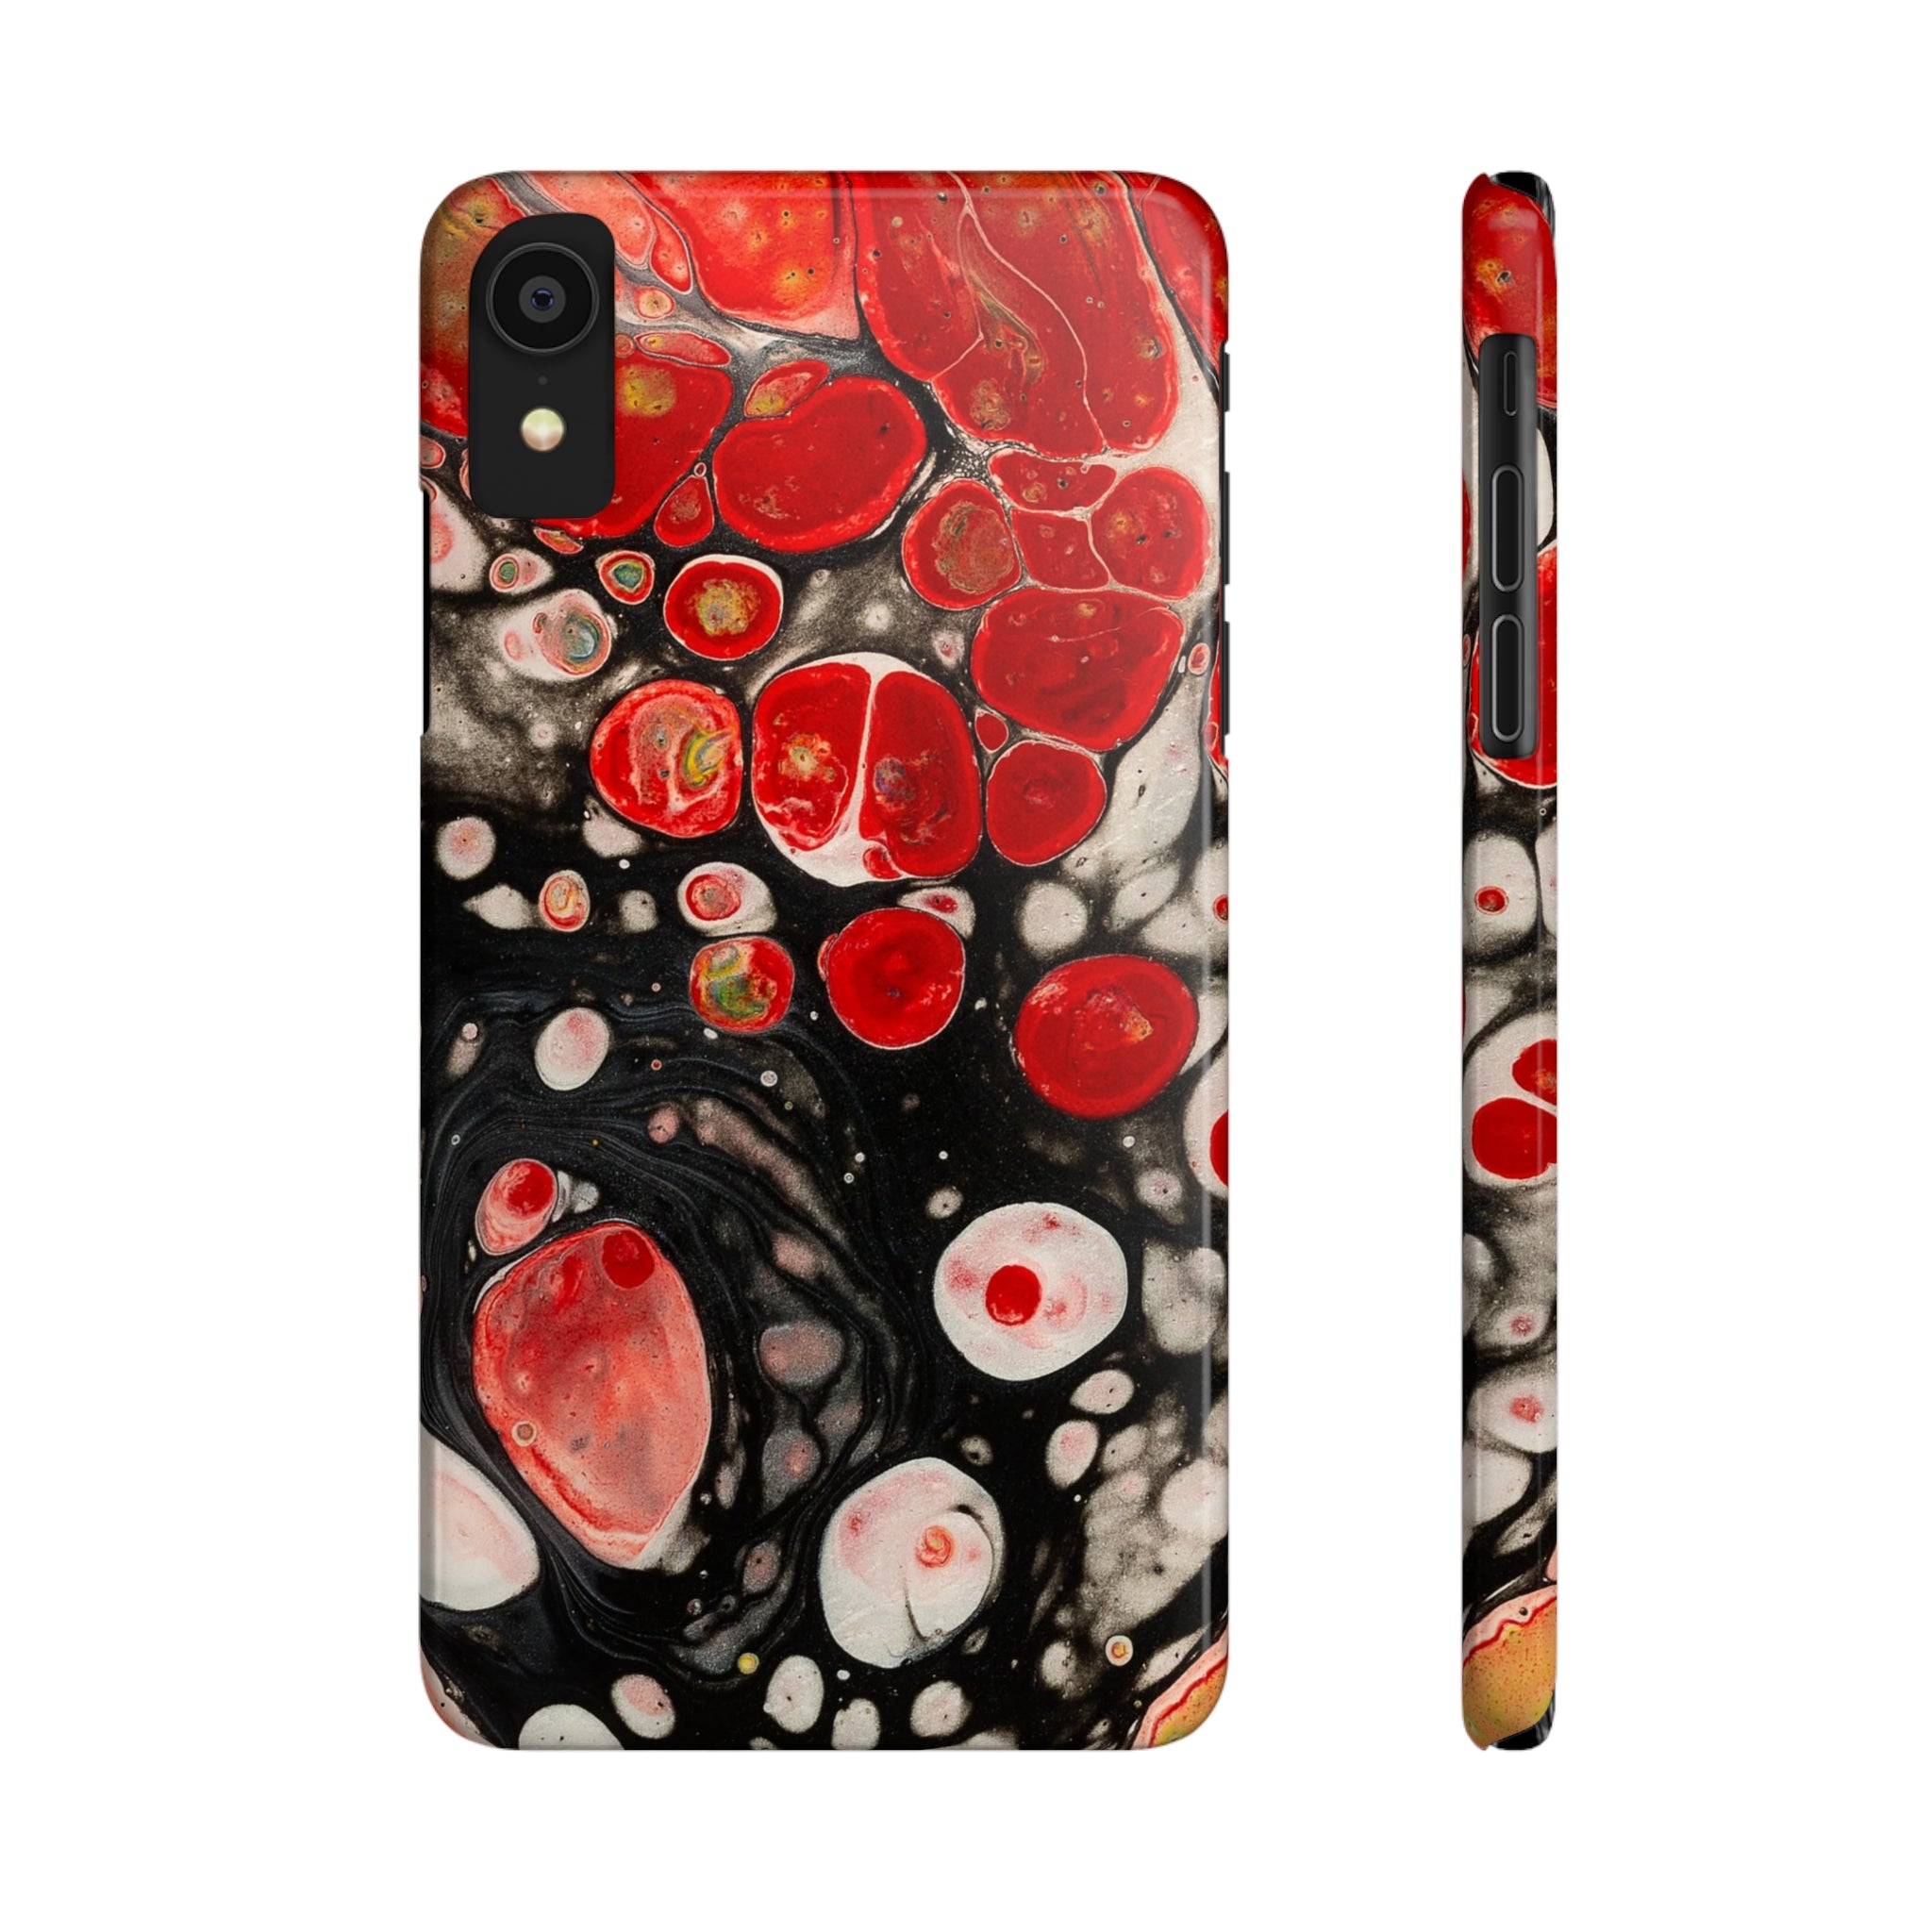 Exiting The Chaos - Slim Phone Cases